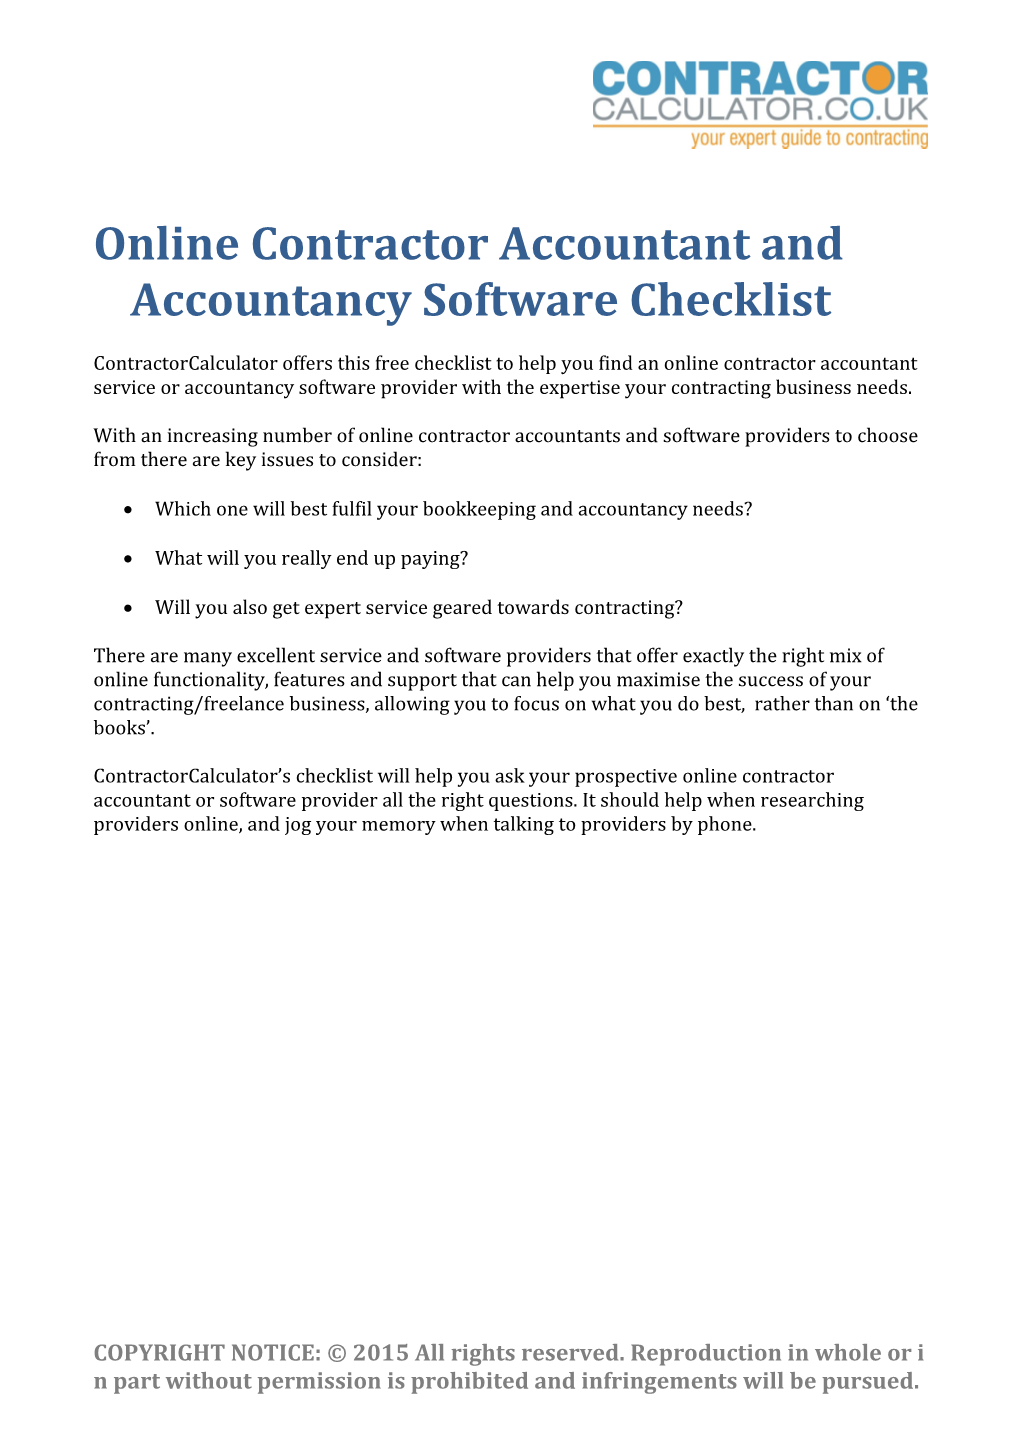 Online Contractor Accountant and Accountancy Software Checklist